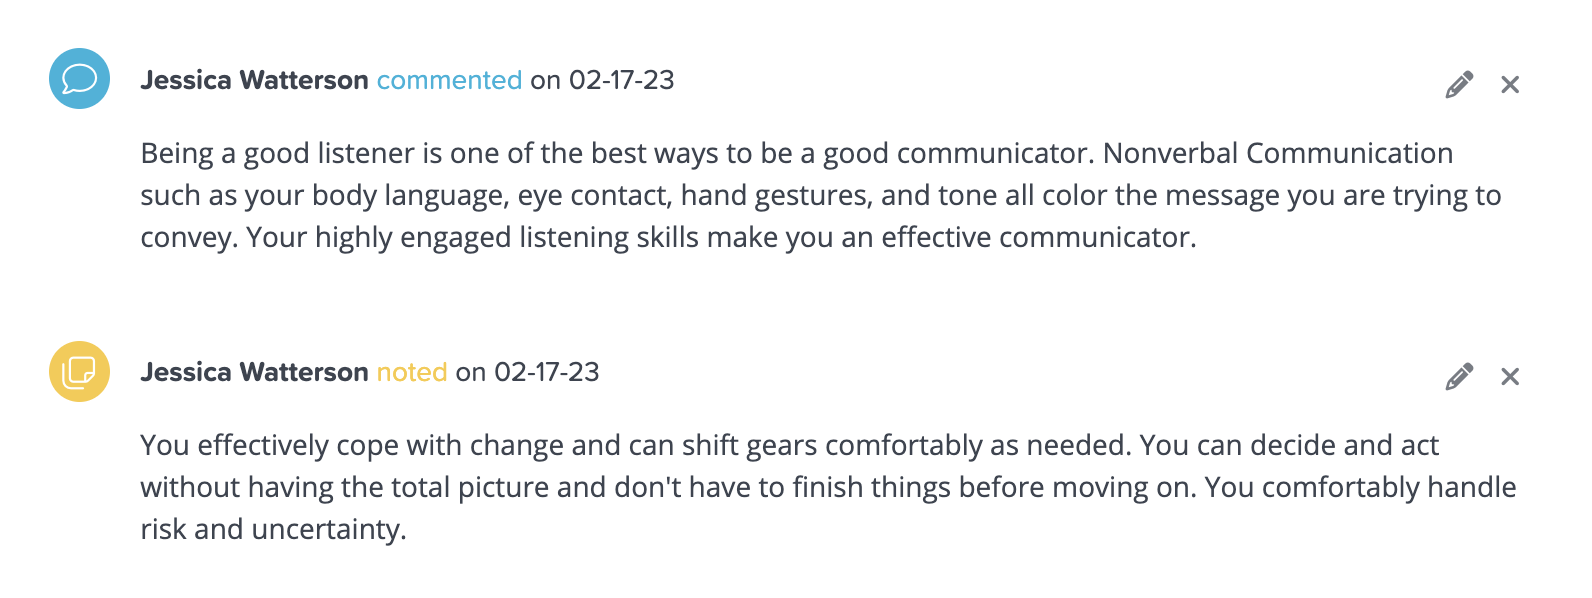 Increased legibility on comments and notes